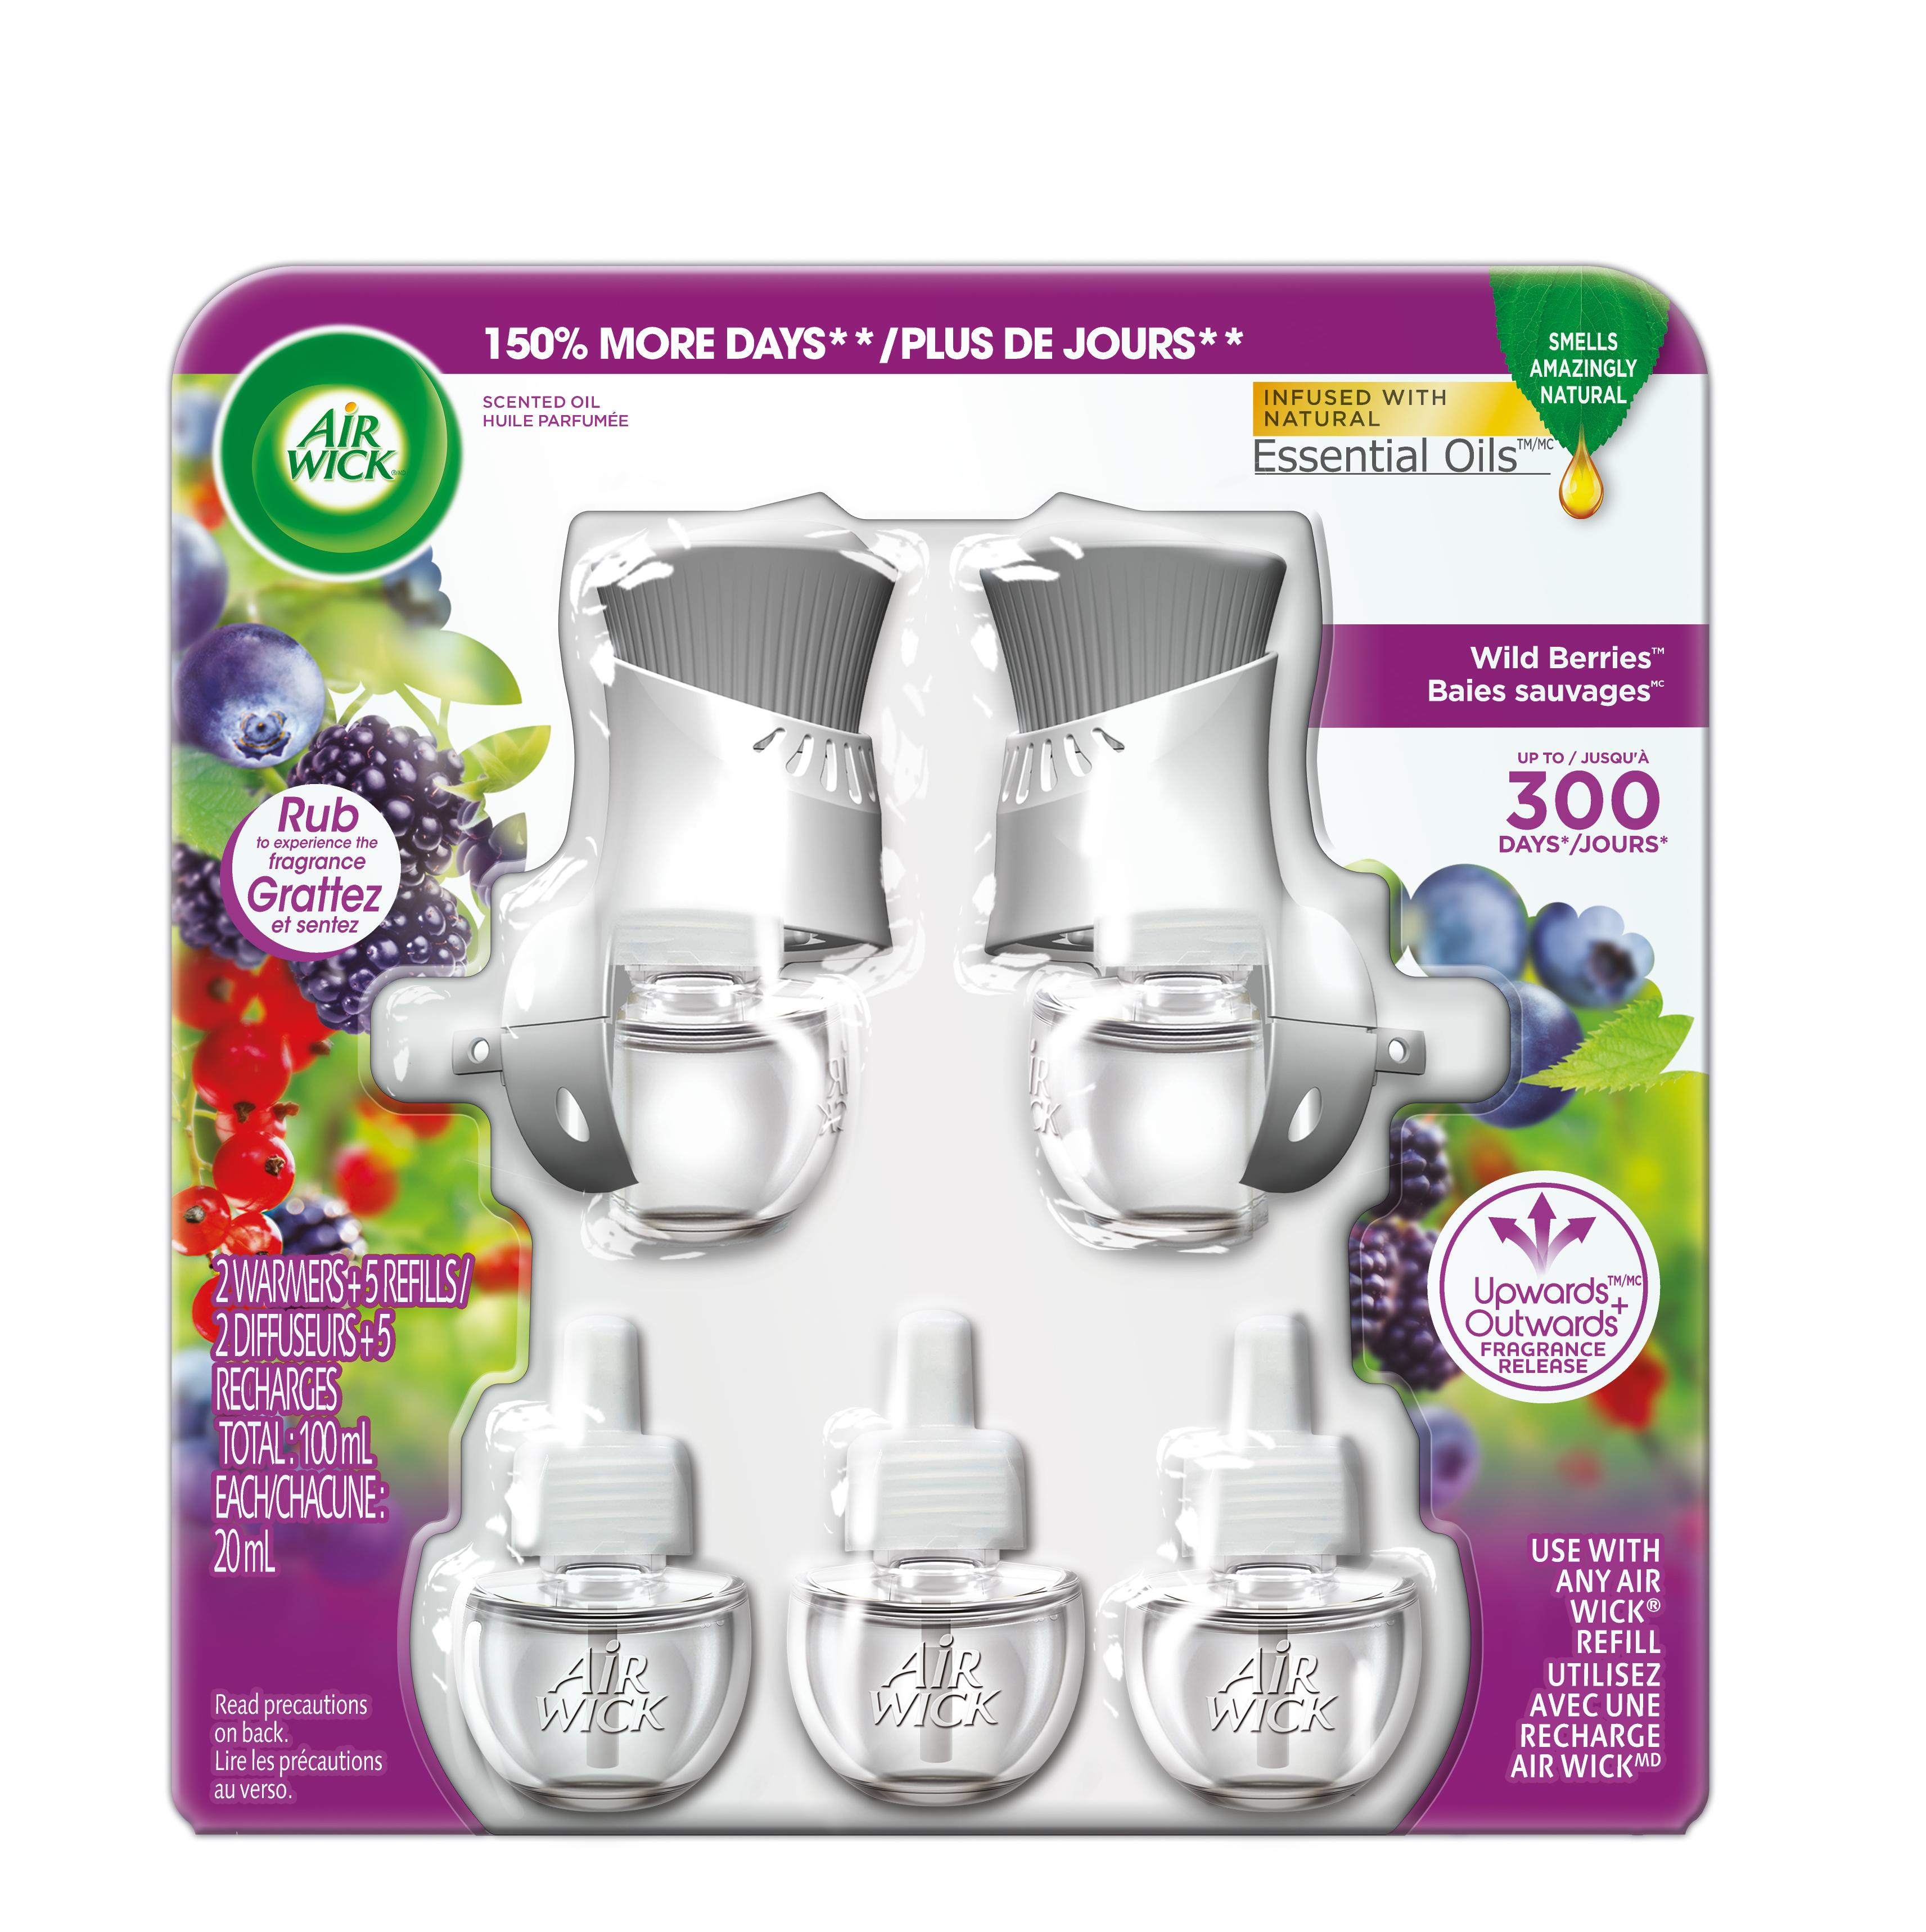 AIR WICK® Scented Oil - Wild Berries - Kit (Canada)